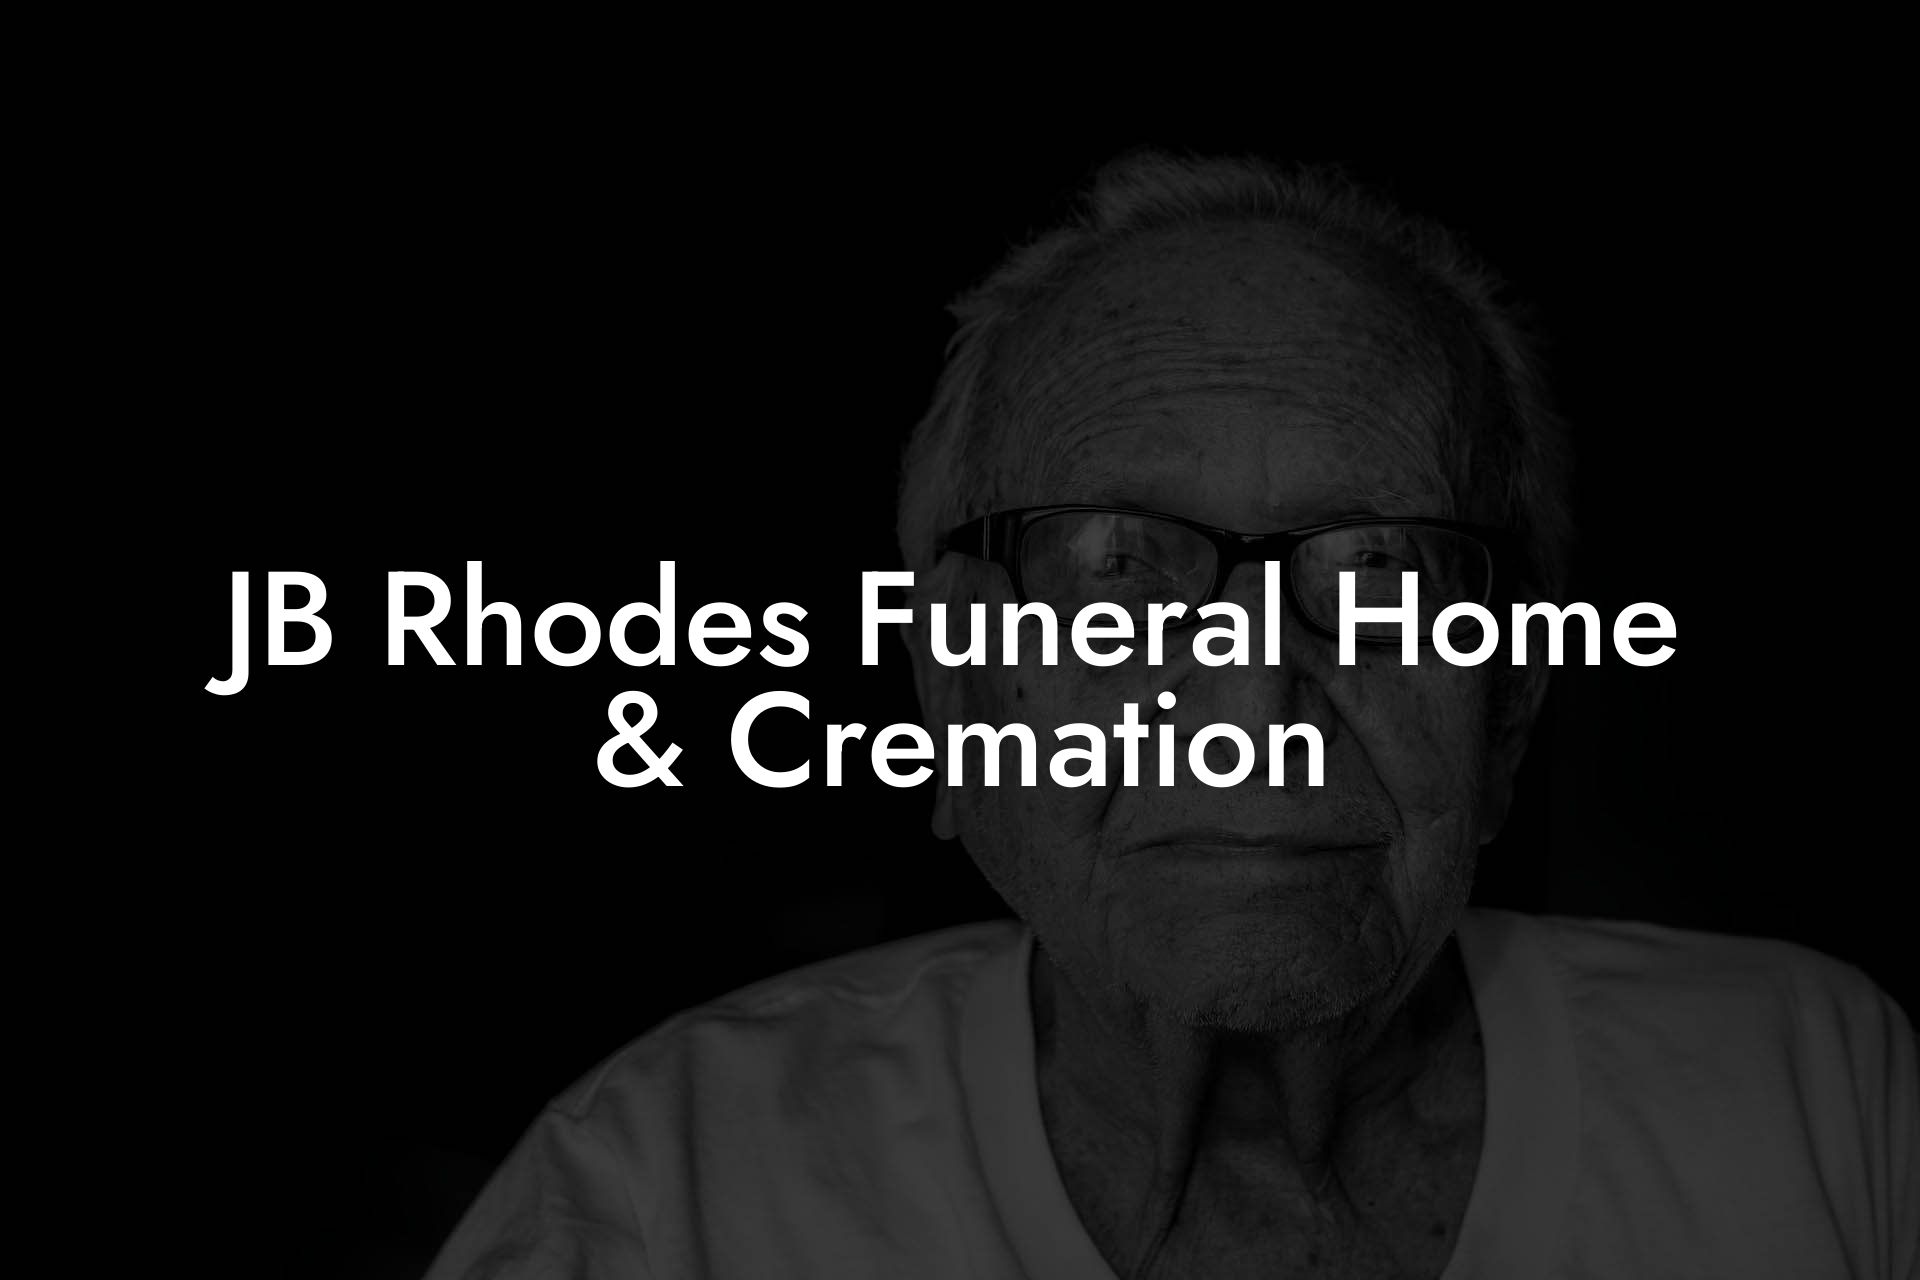 JB Rhodes Funeral Home & Cremation